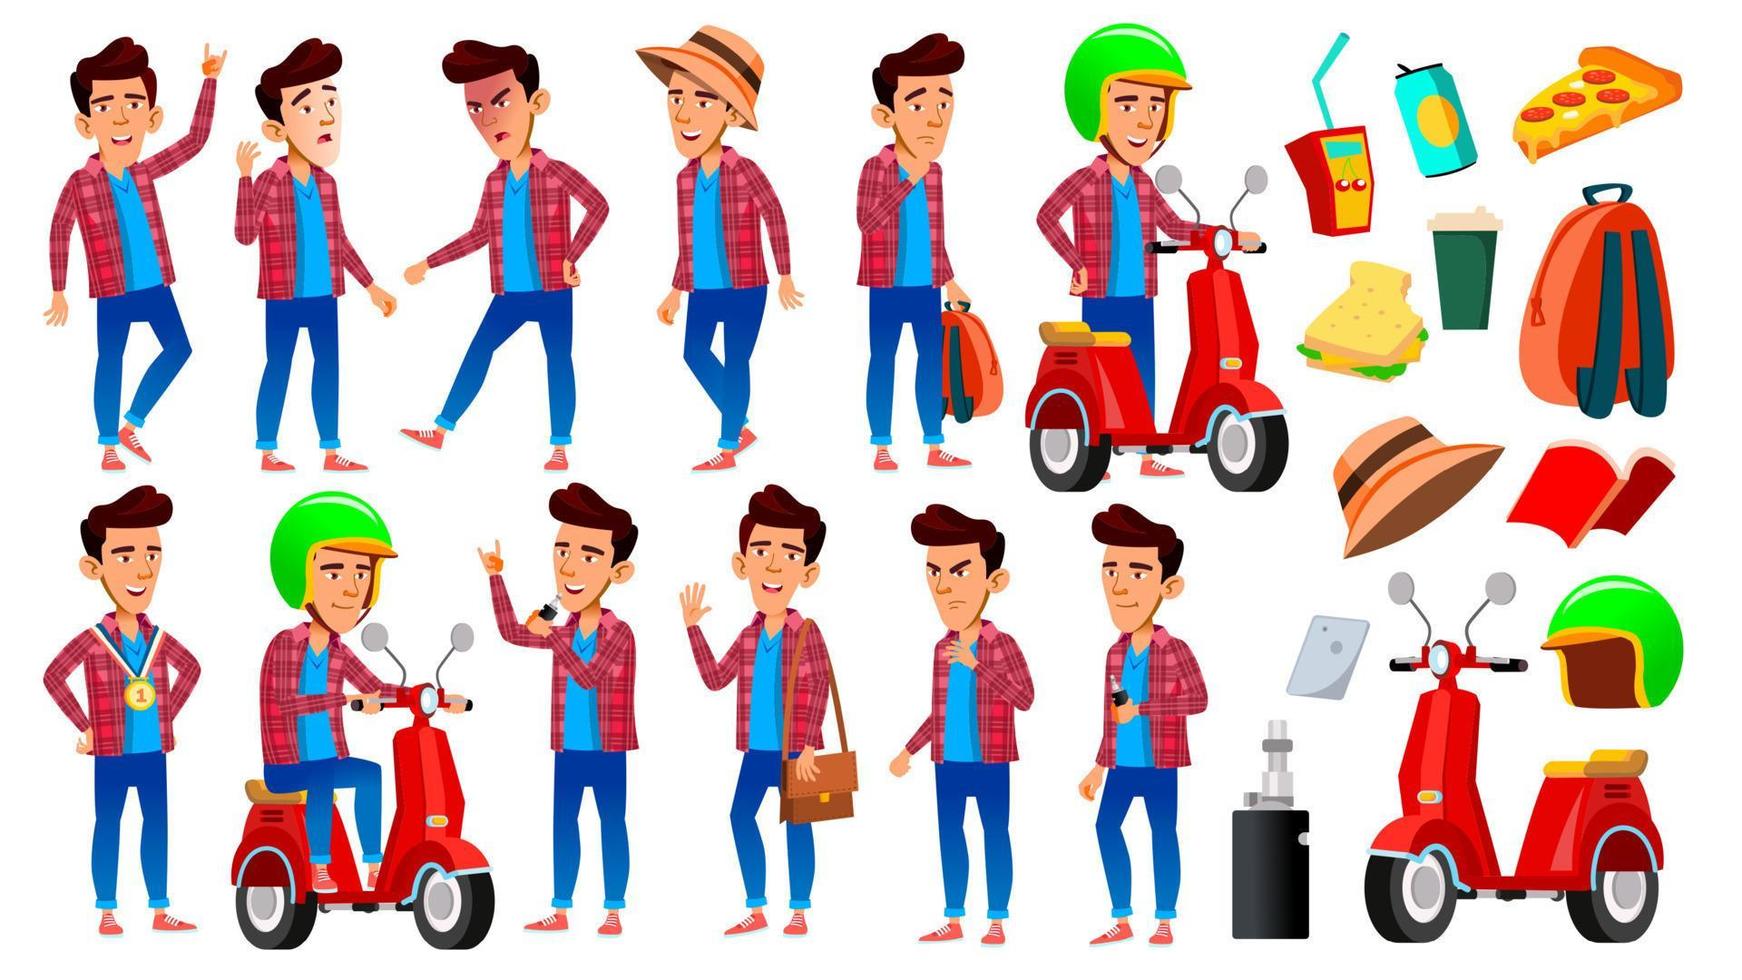 Asian Boy Schoolboy Kid Poses Set Vector. High School Child. School Student. Delivery Service. Scooter. For Presentation, Print, Invitation Design. Isolated Cartoon Illustration vector